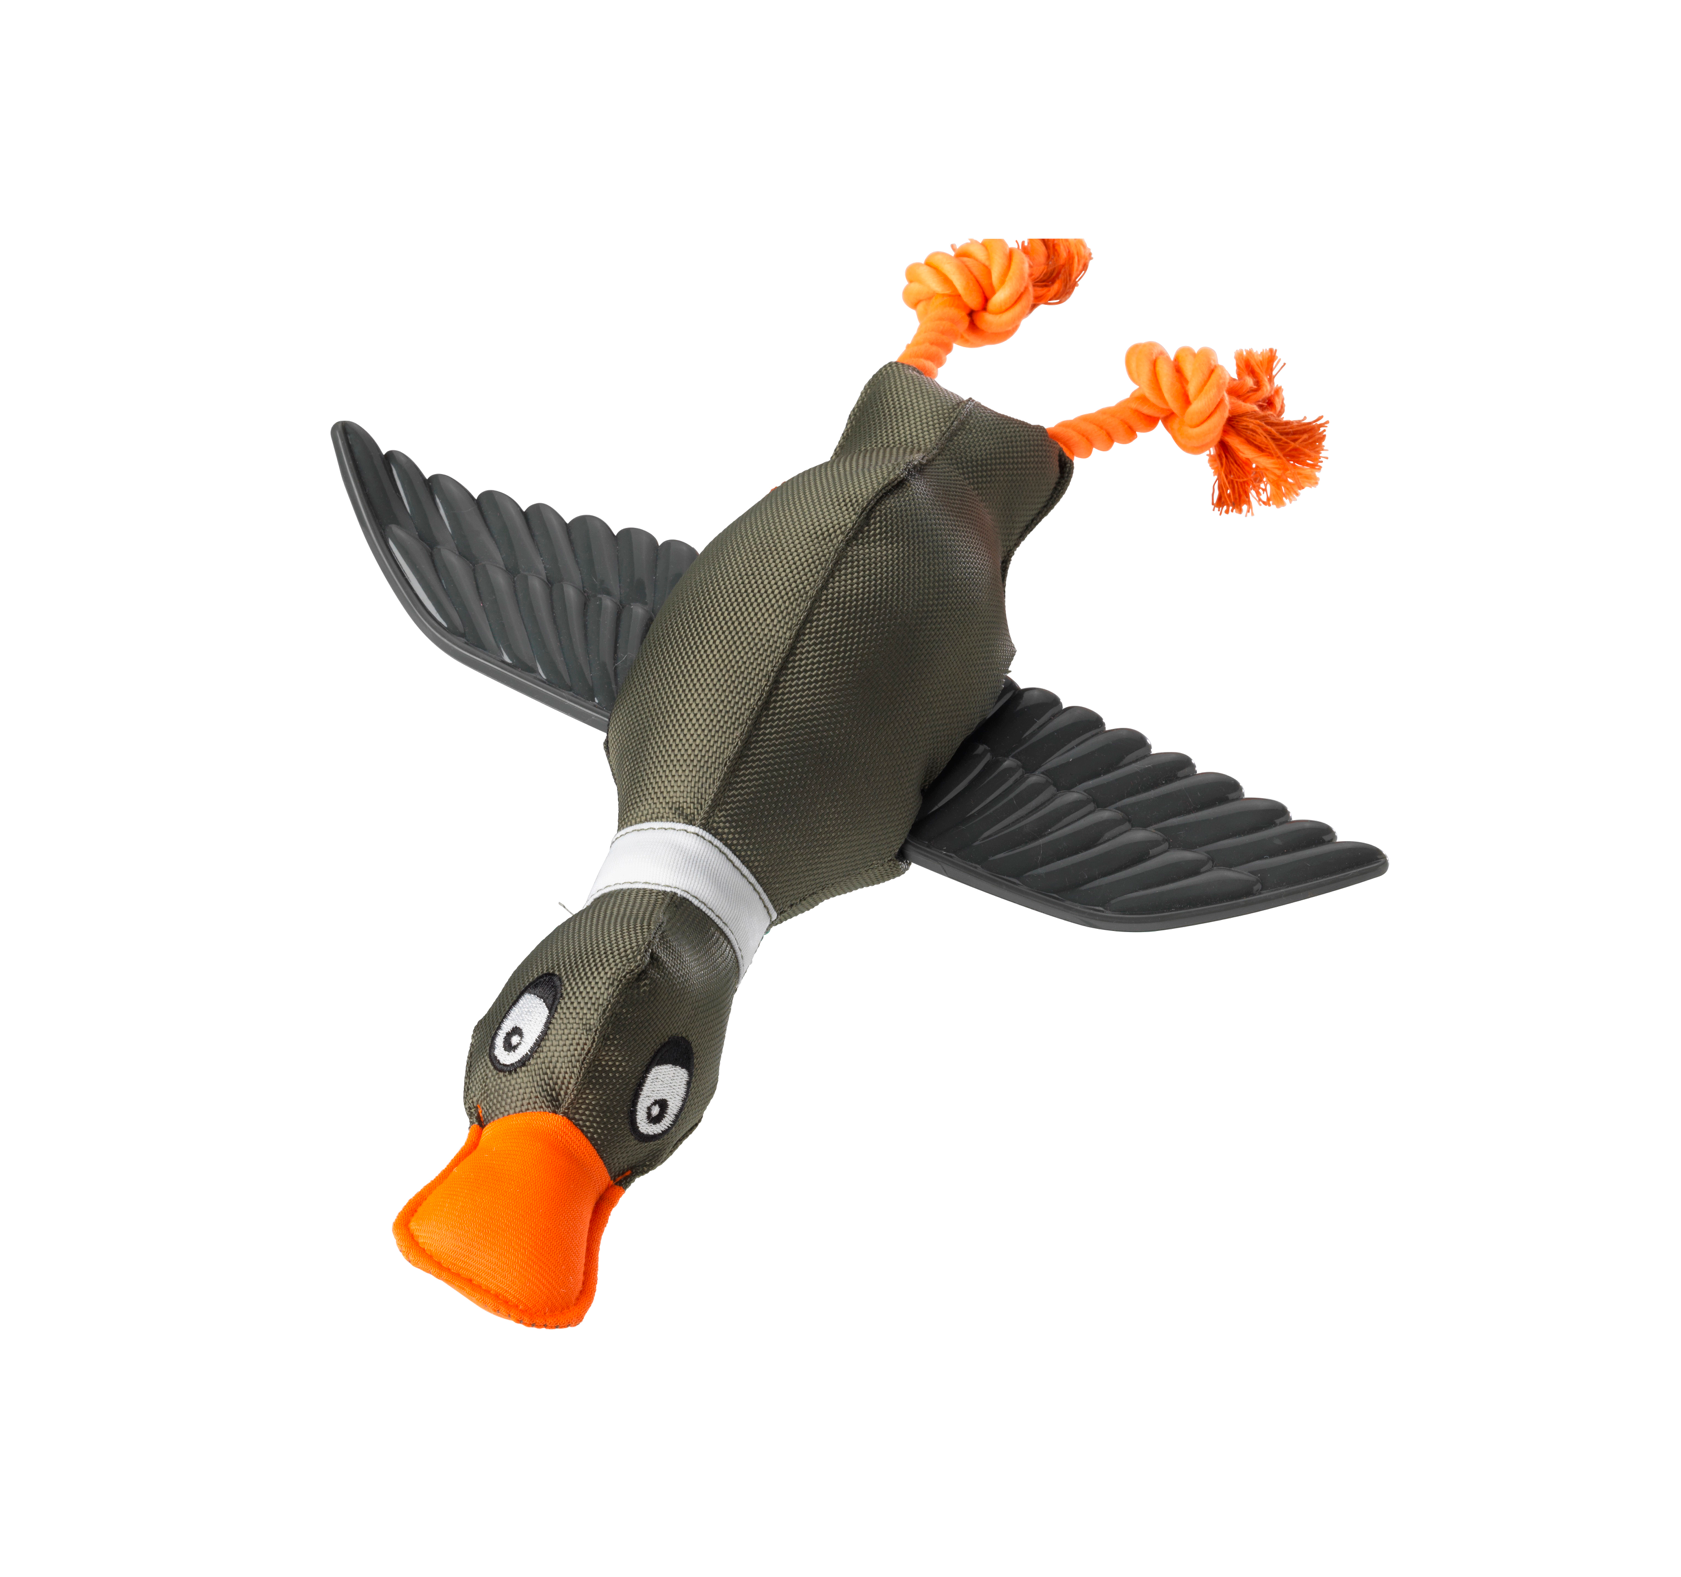 Khaki Duck Thrower Dog Toy With TPR Textured Wings by House of Paws 